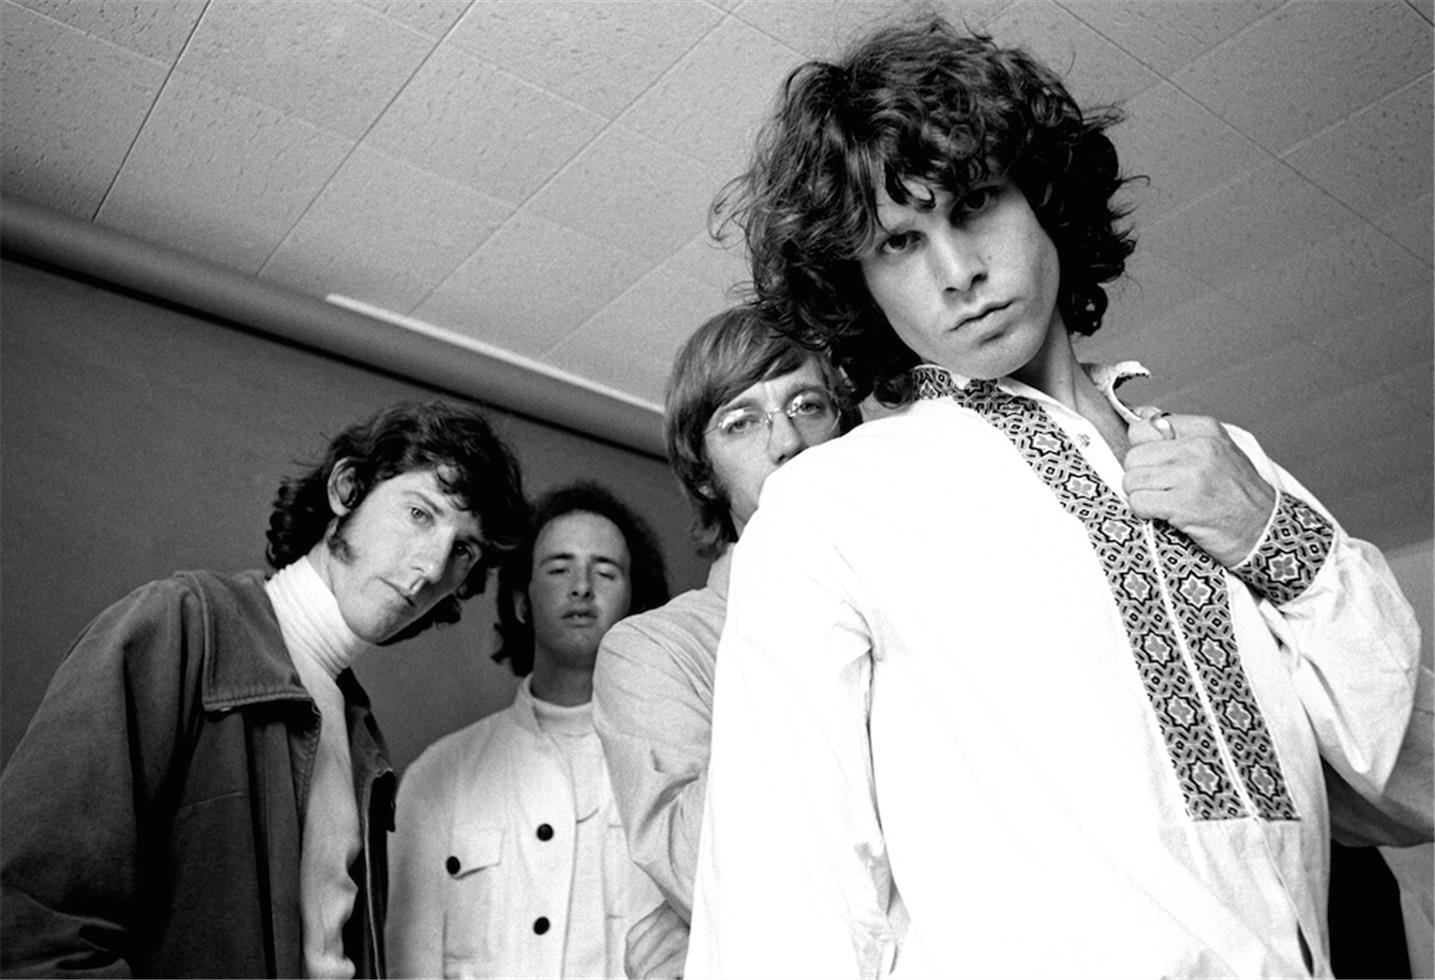 Guy Webster Black and White Photograph - The Doors, Studio